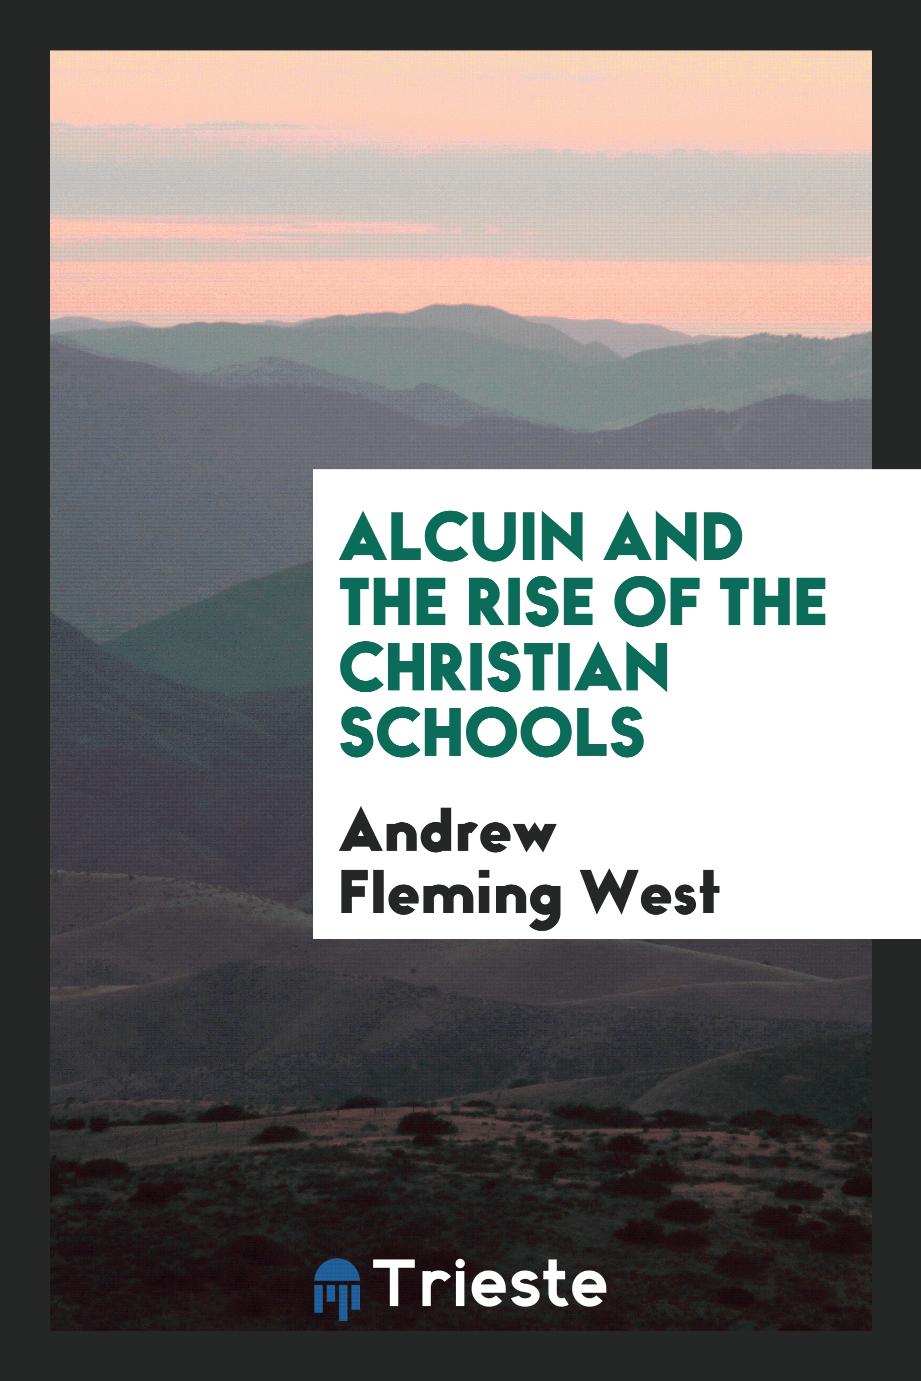 Alcuin and the rise of the Christian schools